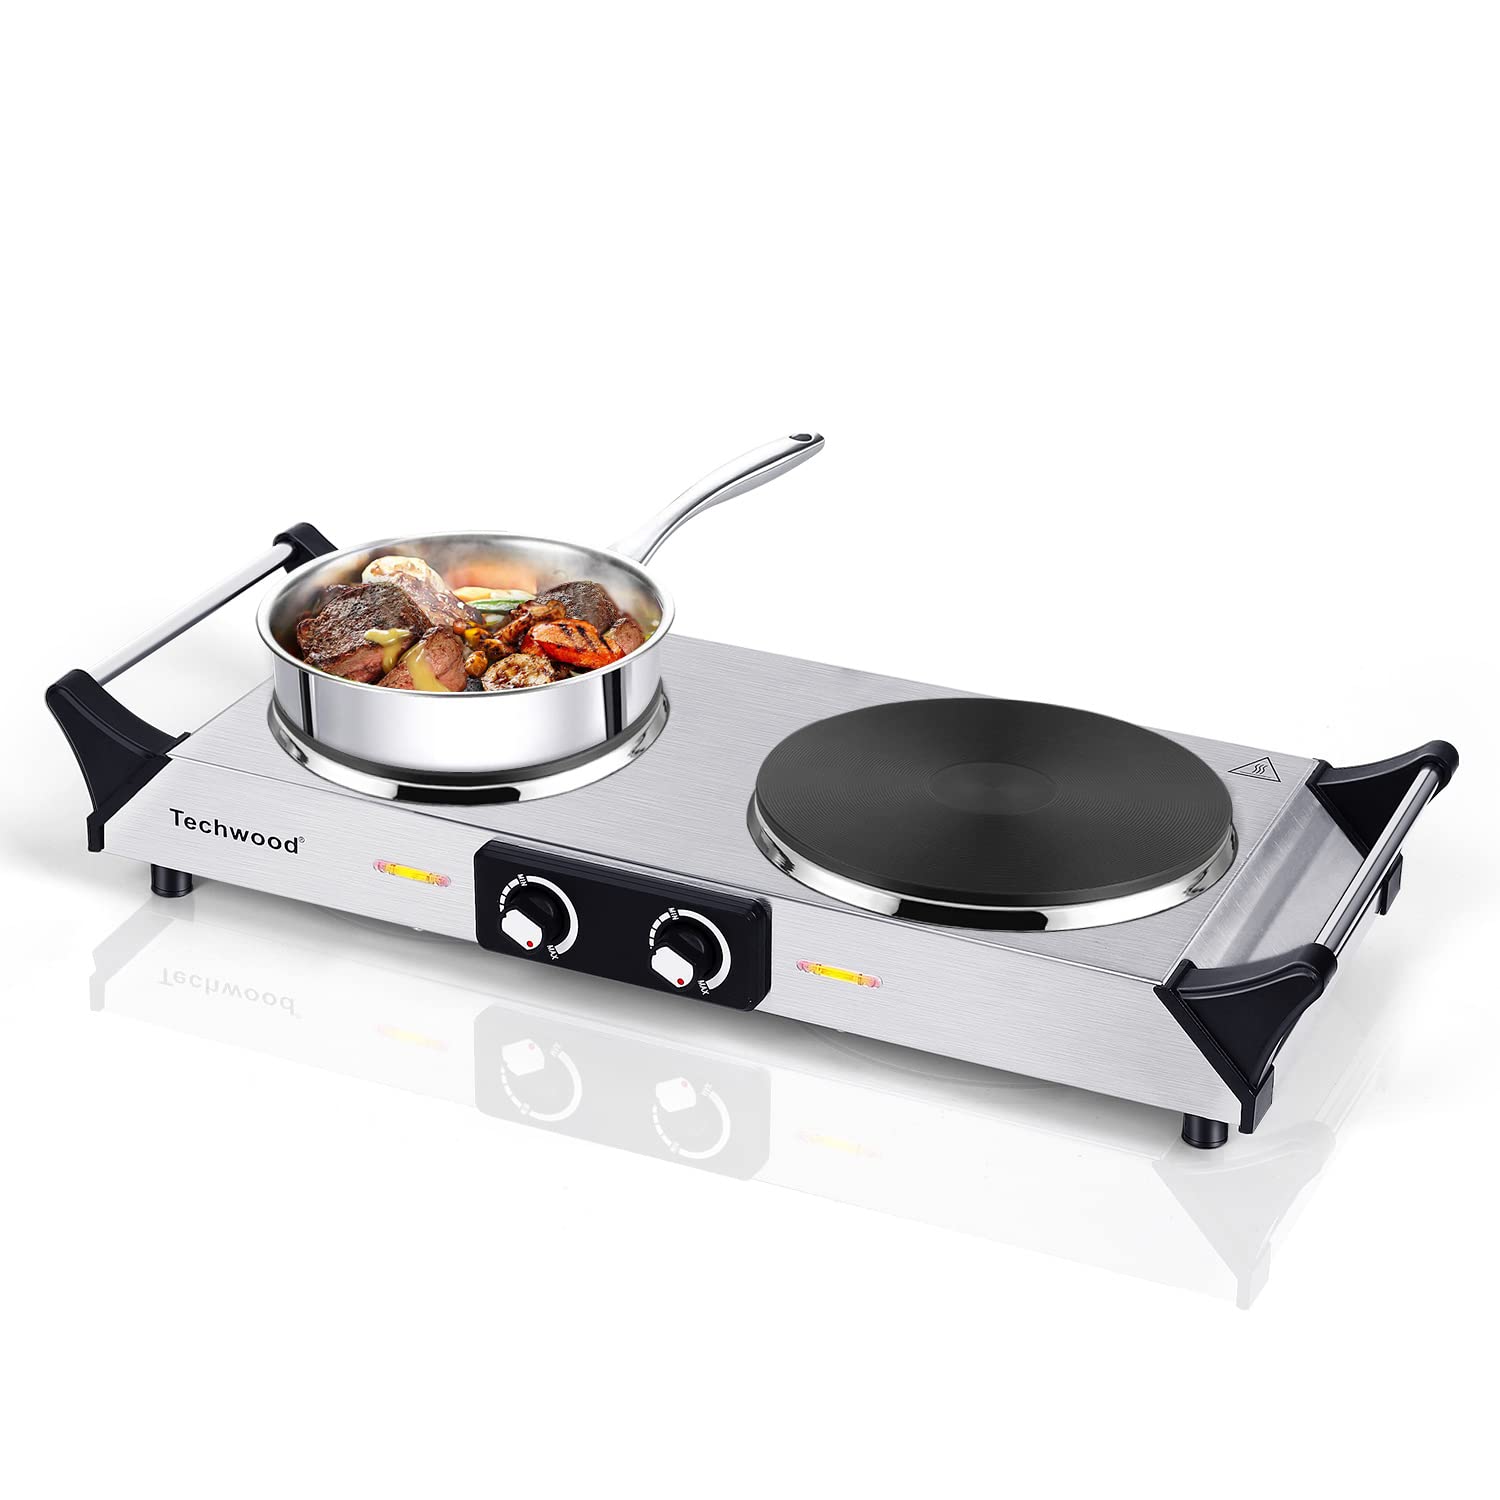 Techwood Hot Plate Portable Electric Stove